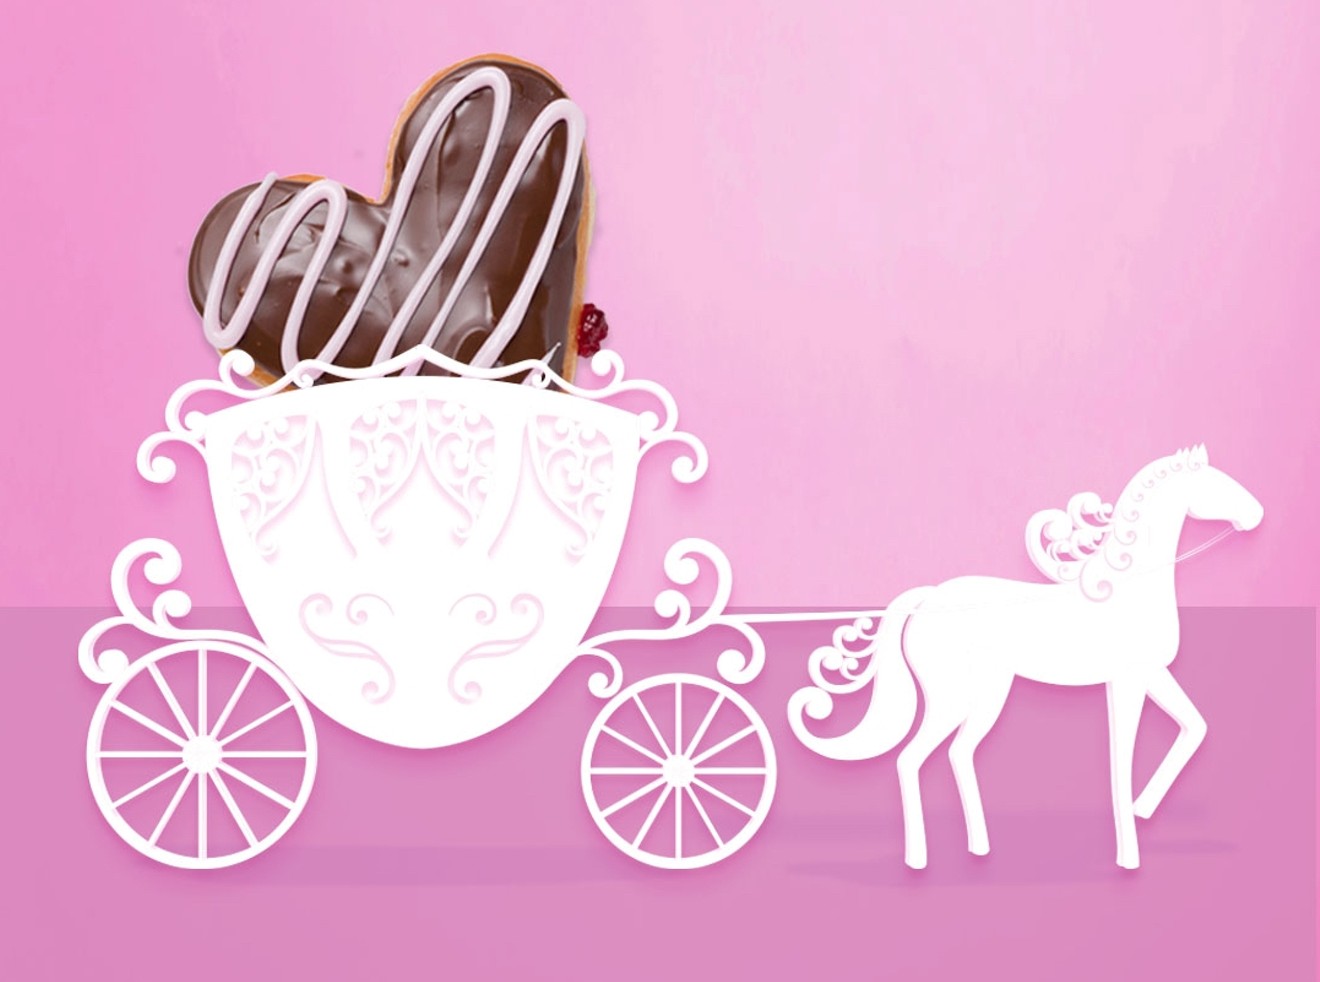 Royal doughnut (carriage not included).